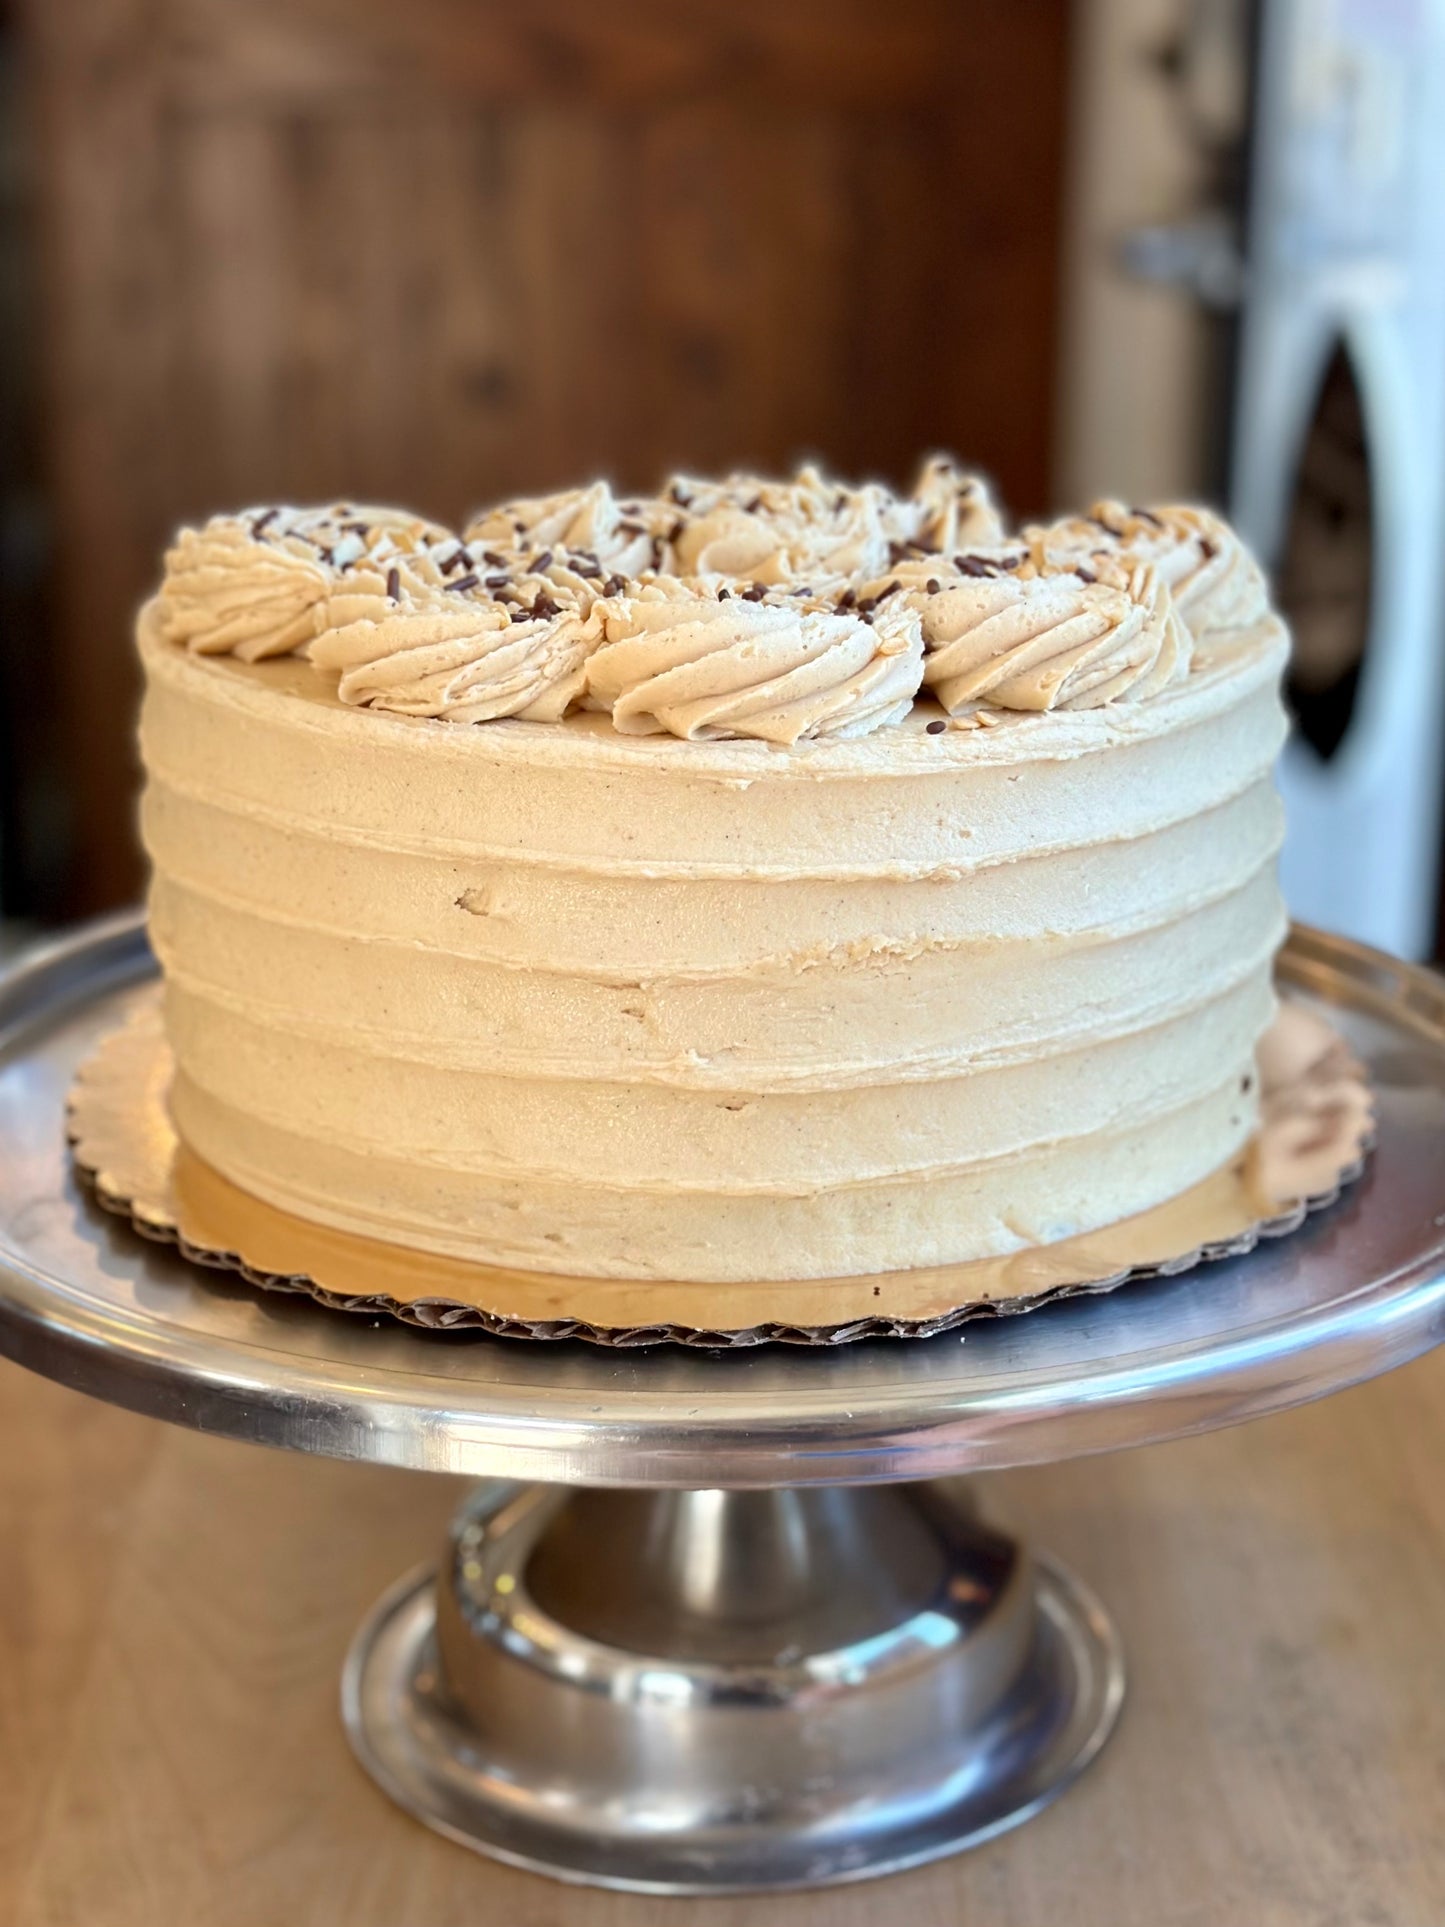 Cake - Chocolate with Peanut Butter Frosting [Friday & Saturday ONLY]